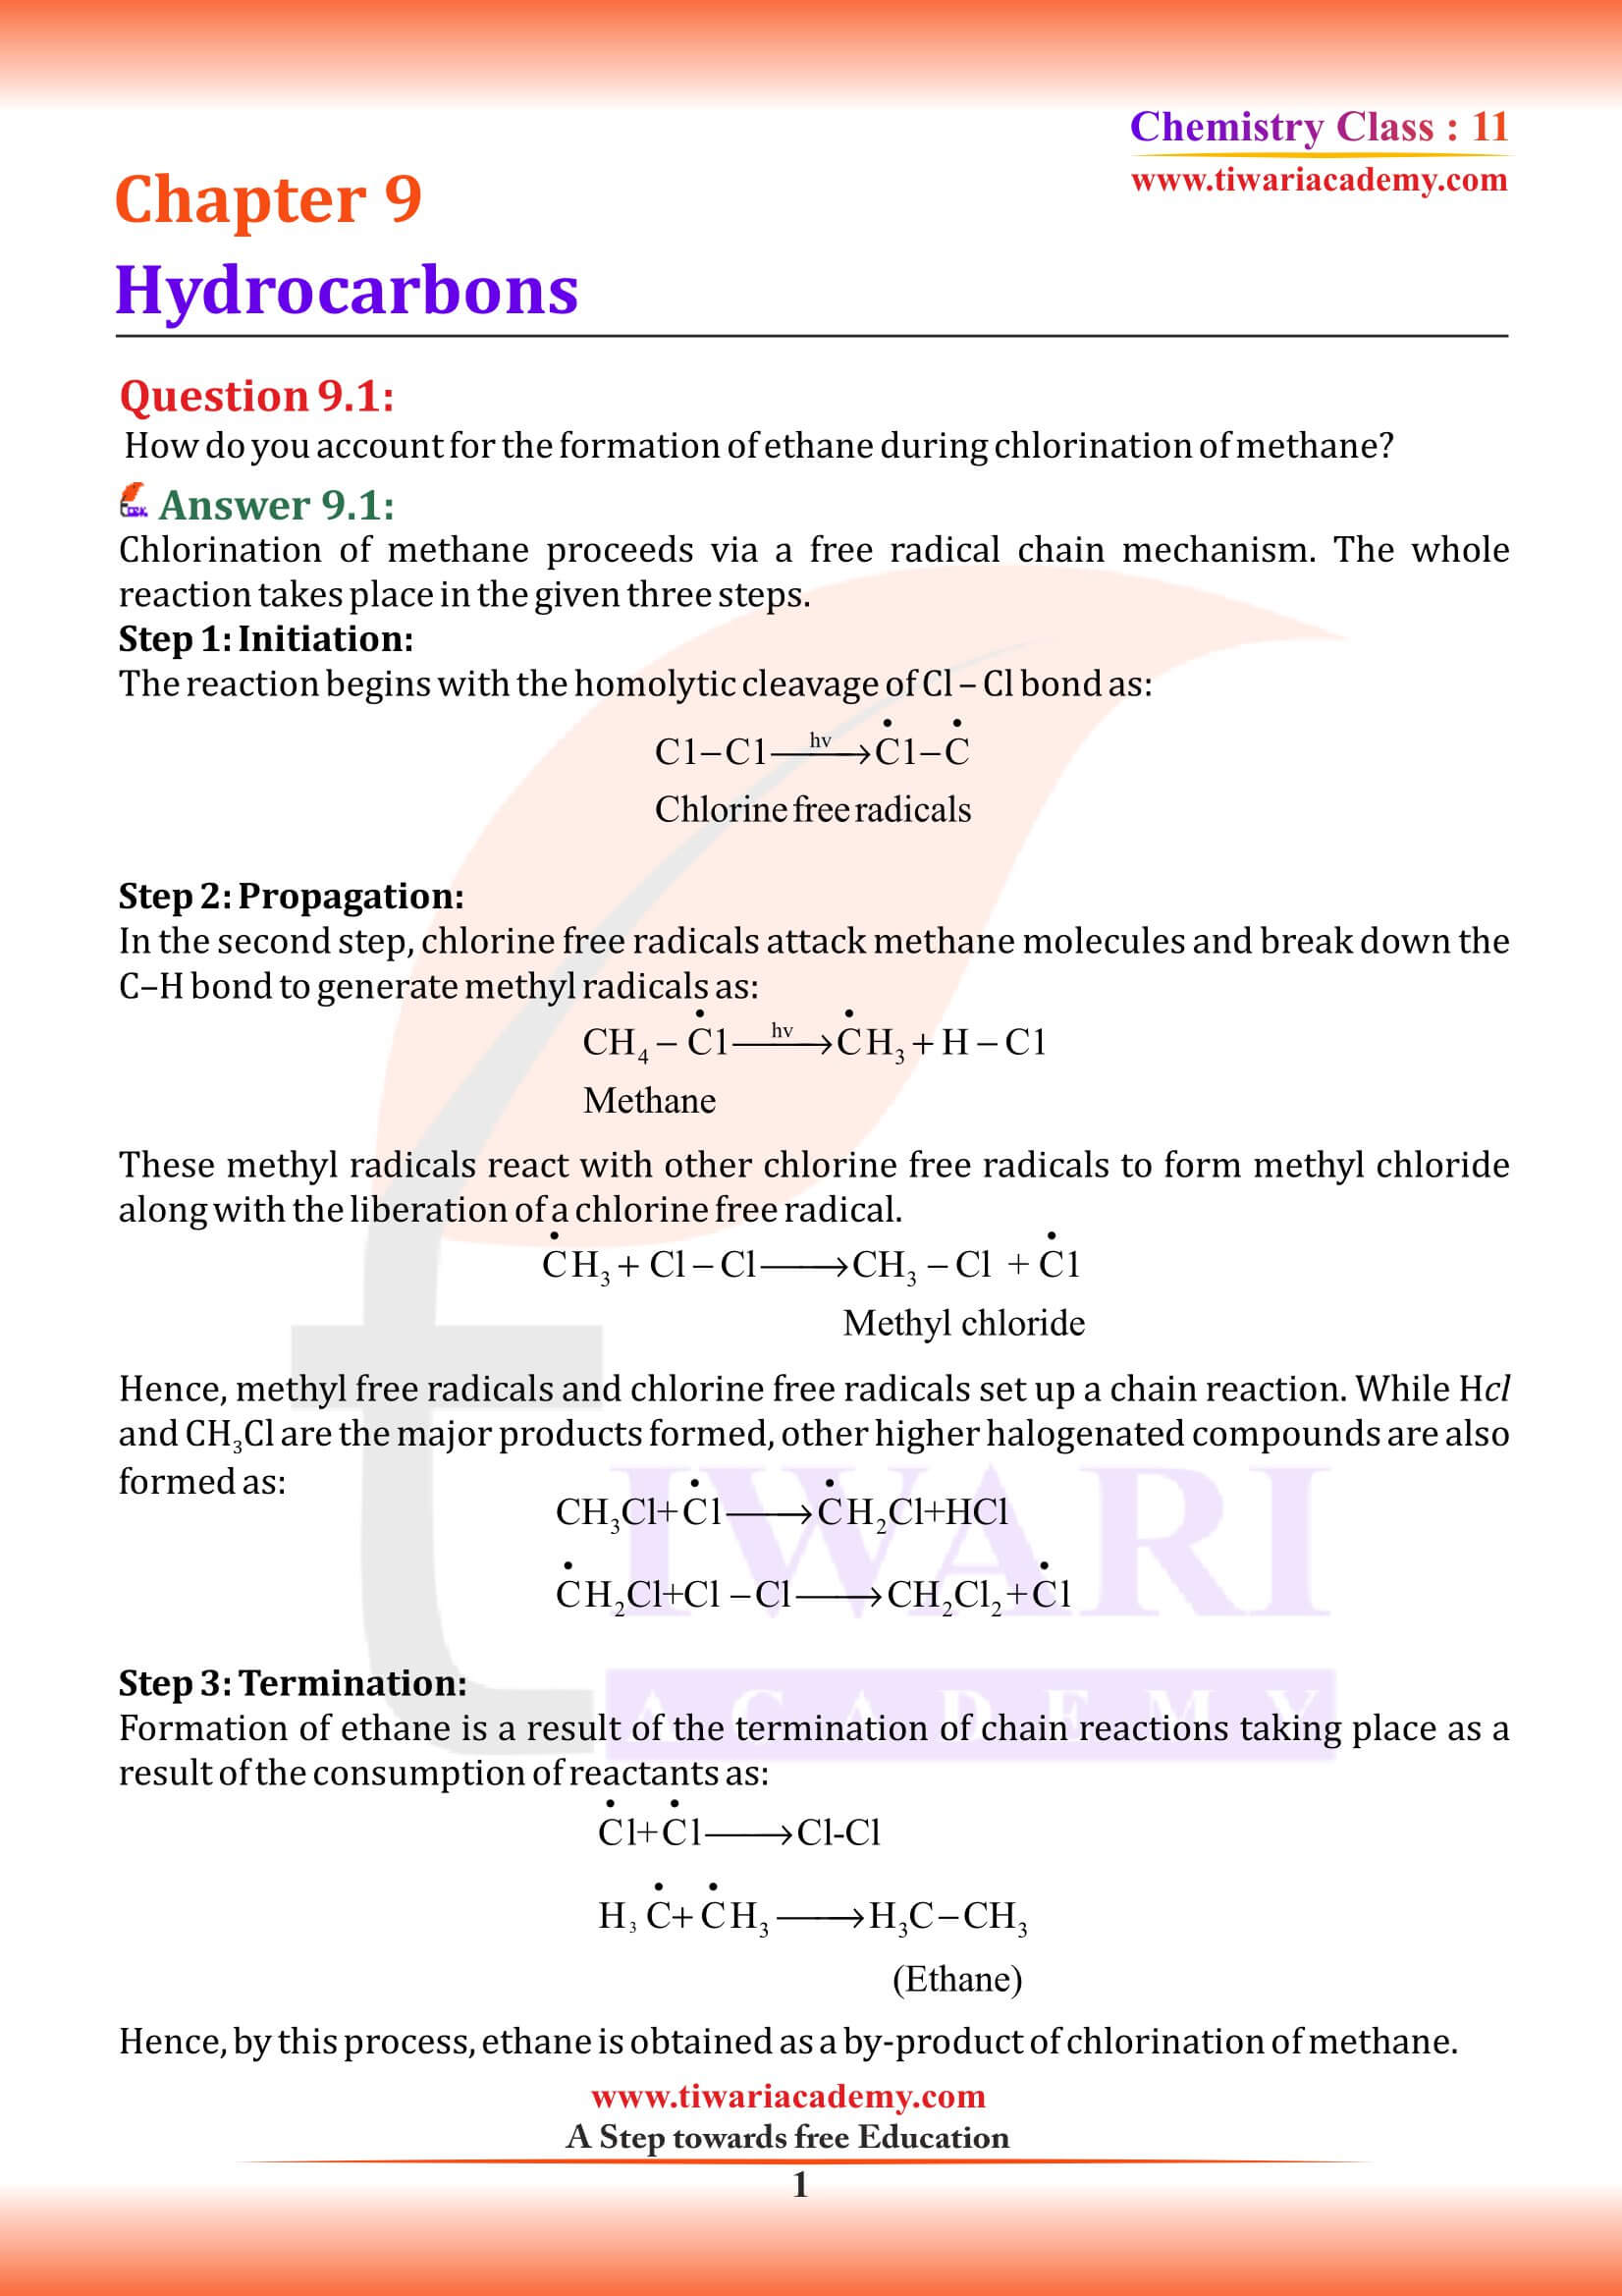 NCERT Class 11 Chemistry Chapter 9 Hydrocarbons